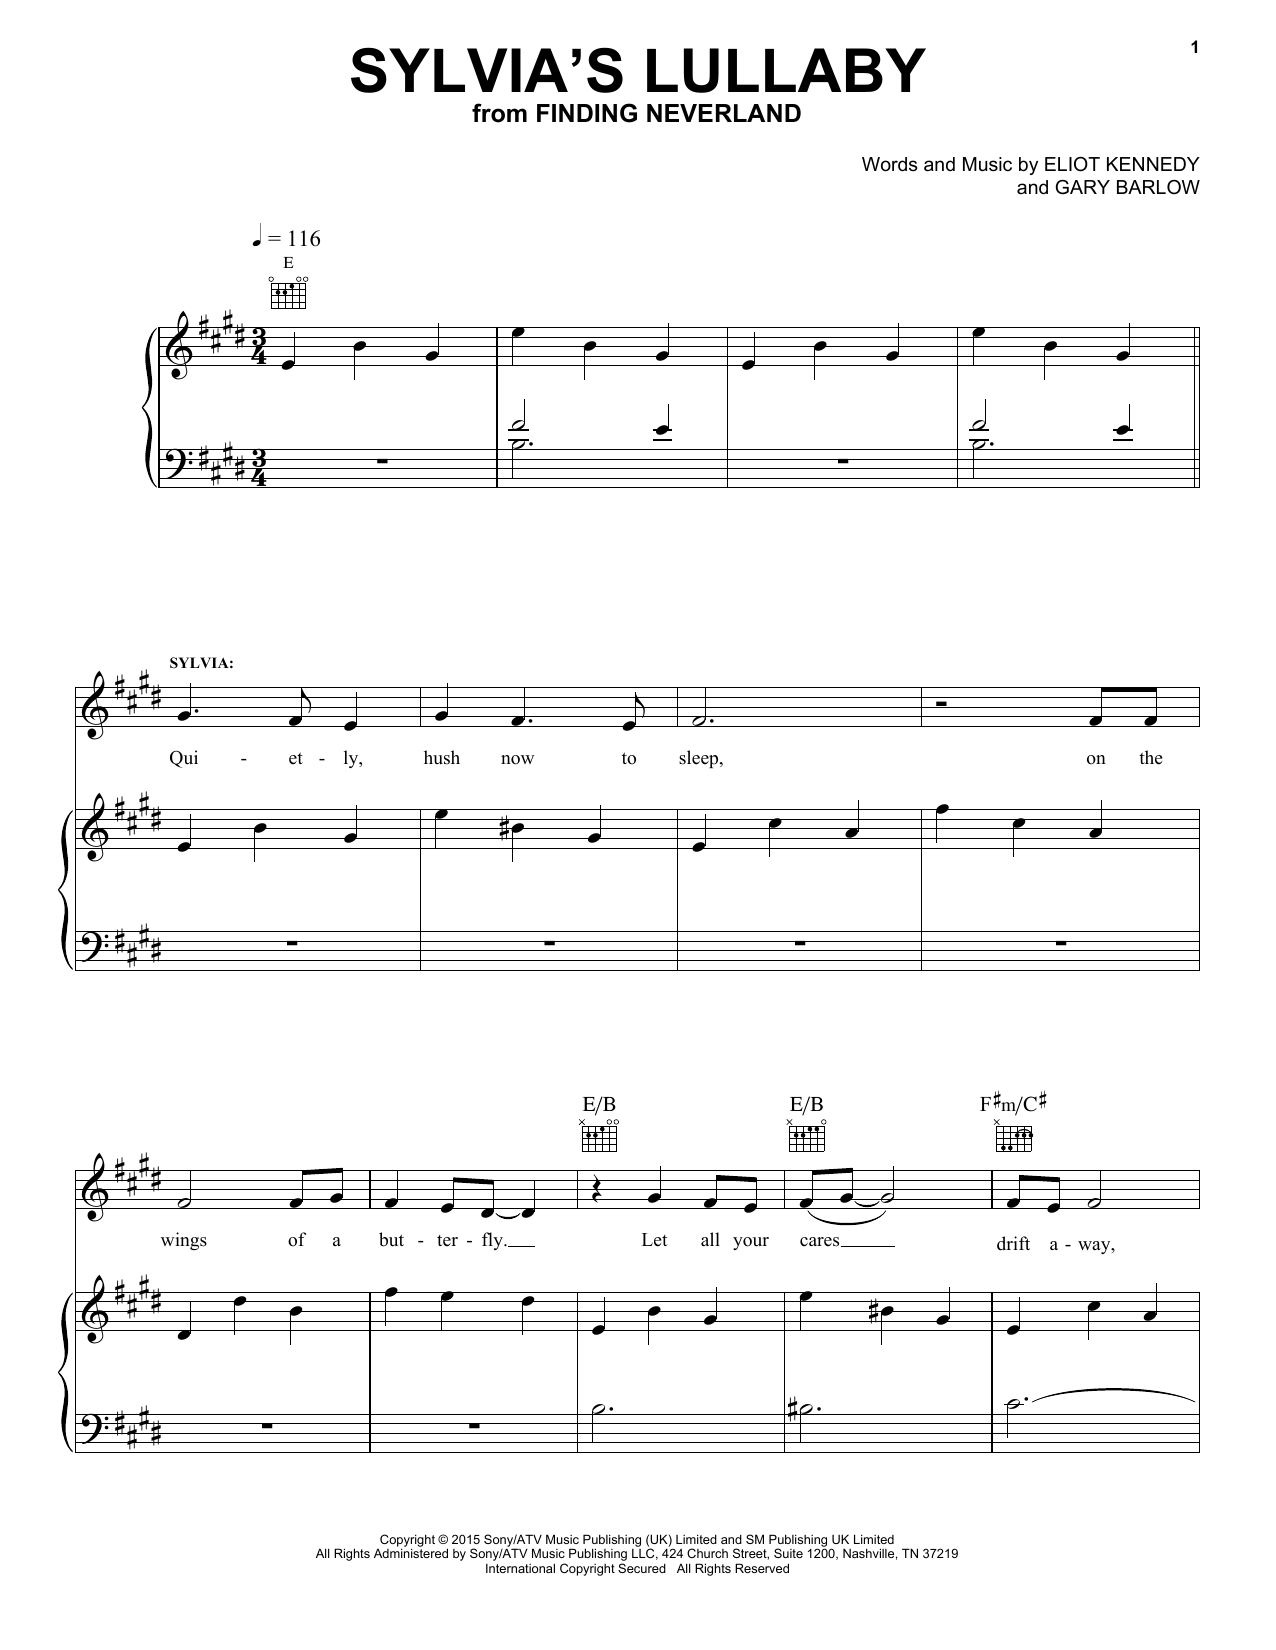 Download Gary Barlow & Eliot Kennedy Sylvia's Lullaby Sheet Music